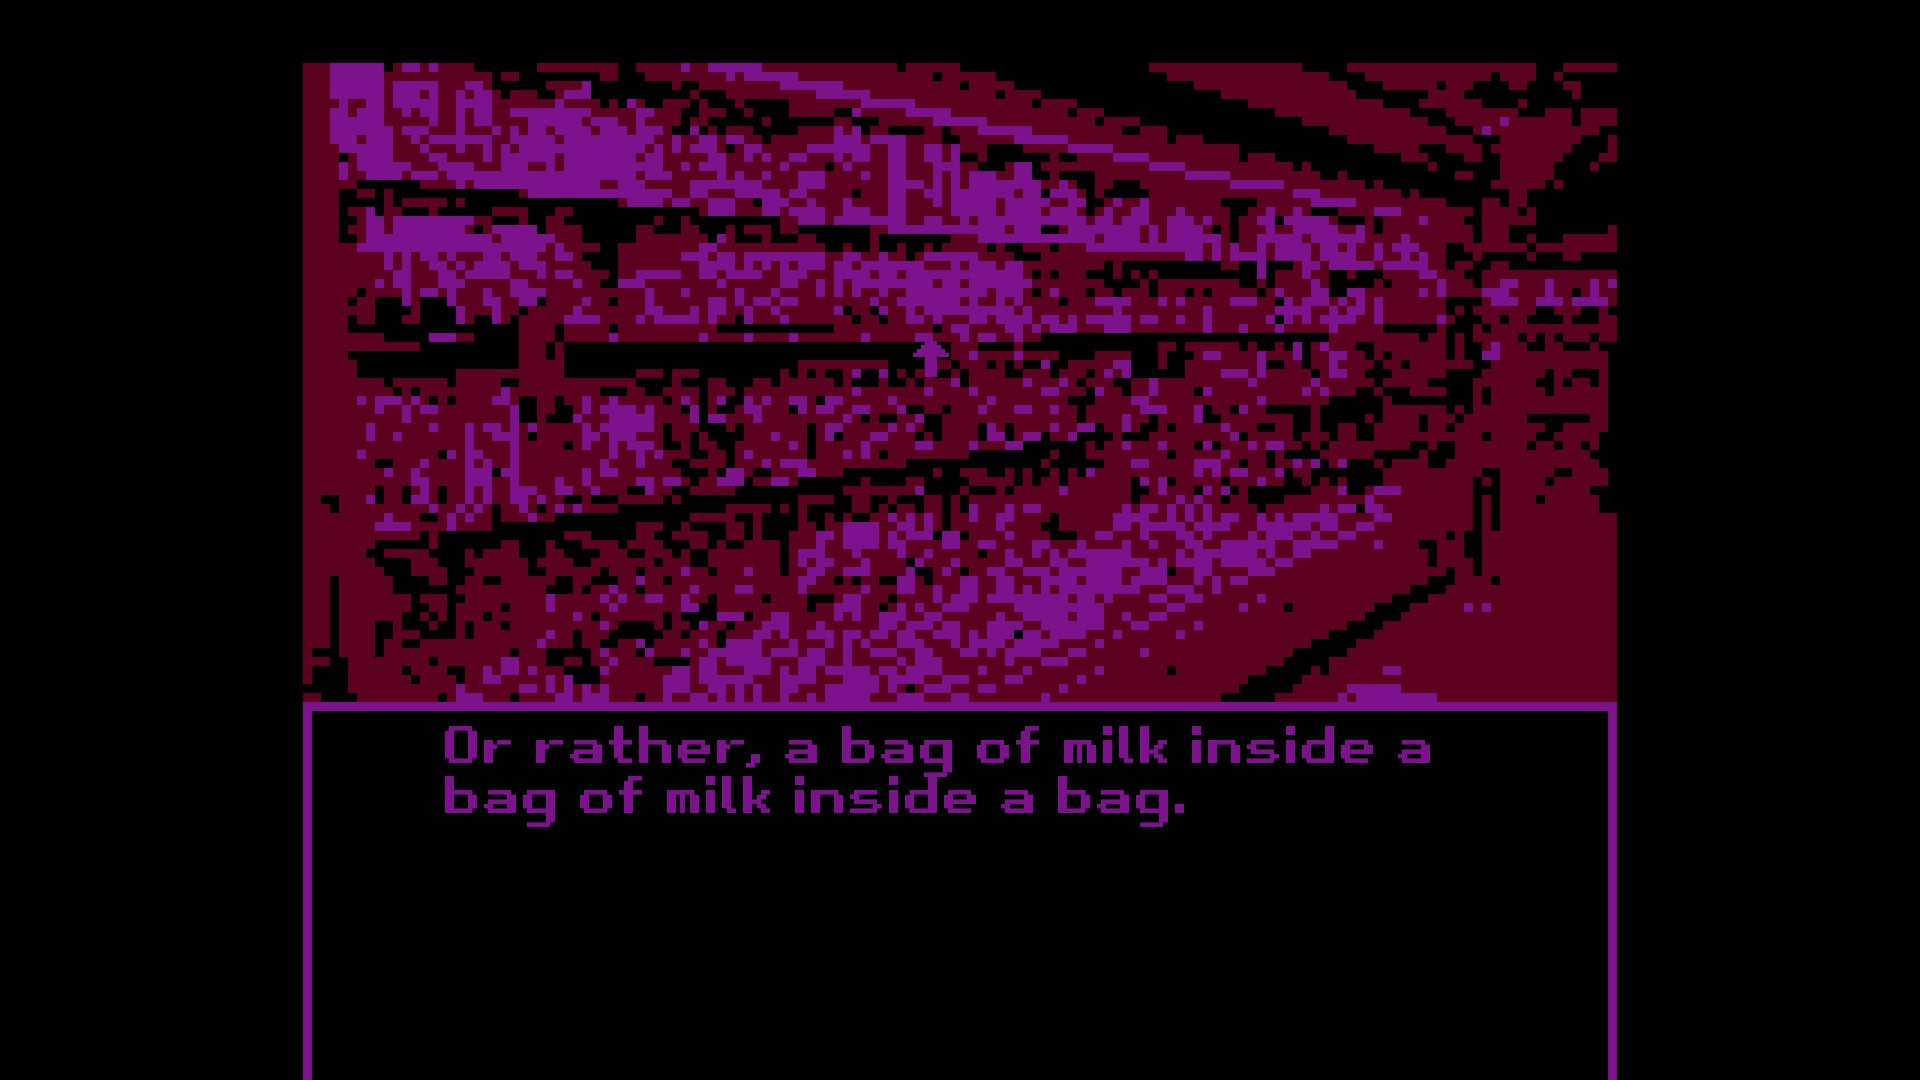 Milk inside a bag of milk inside a bag of milk review | The graphics are jank, but so is the brain